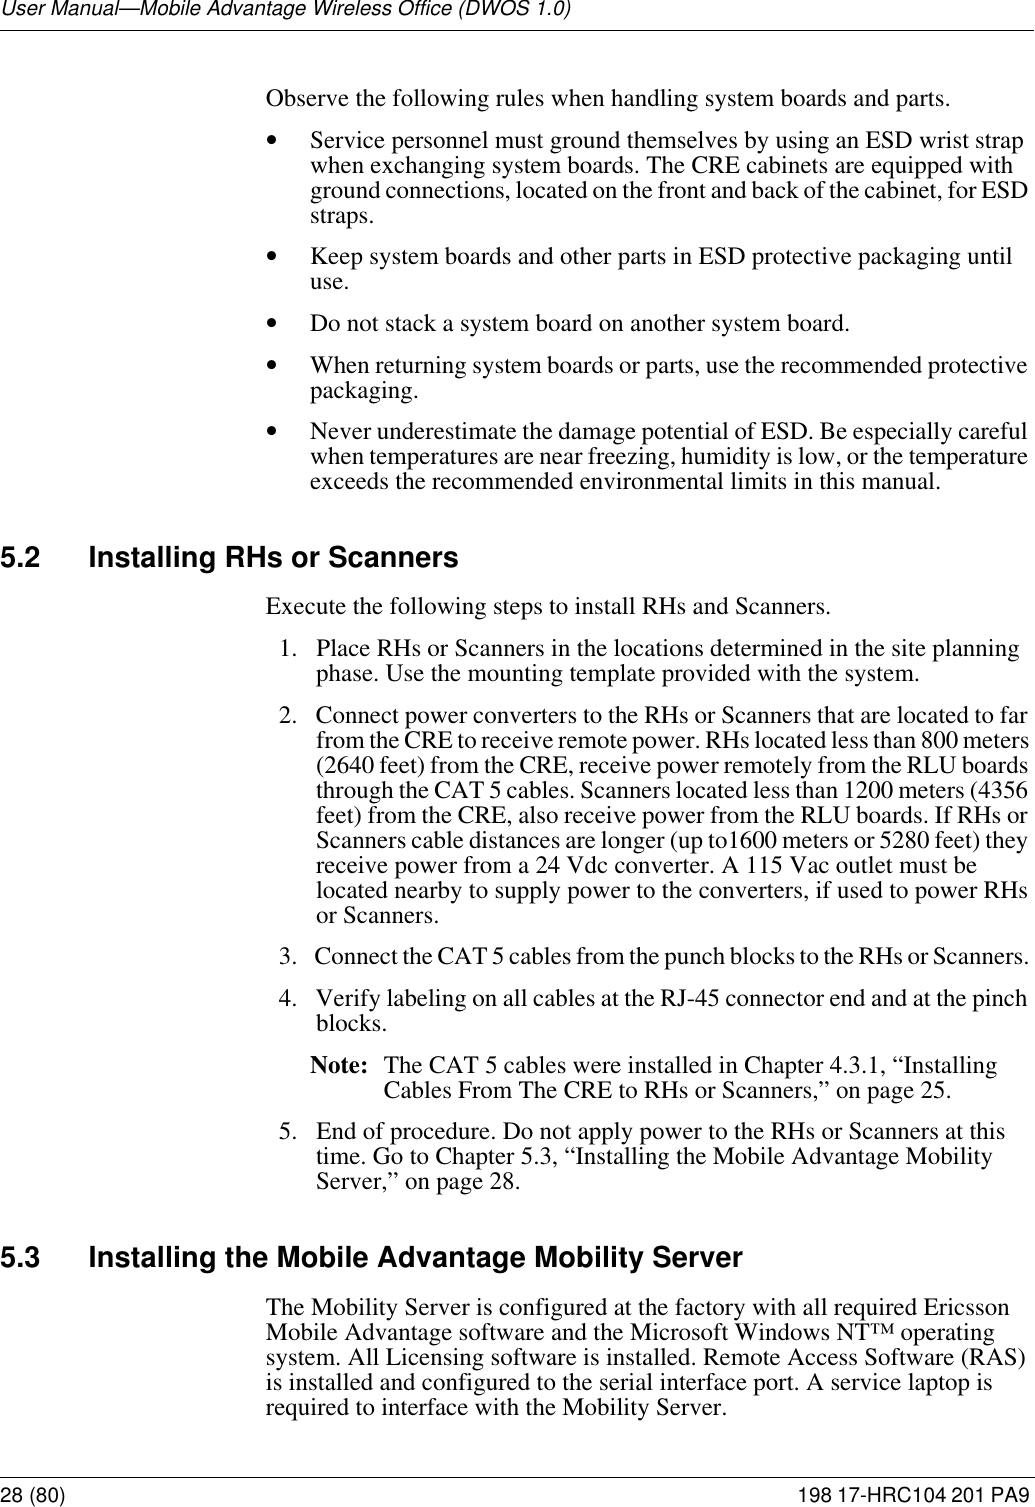 User Manual—Mobile Advantage Wireless Office (DWOS 1.0)28 (80) 198 17-HRC104 201 PA9 Observe the following rules when handling system boards and parts. •Service personnel must ground themselves by using an ESD wrist strap when exchanging system boards. The CRE cabinets are equipped with ground connections, located on the front and back of the cabinet, for ESD straps.•Keep system boards and other parts in ESD protective packaging until use.•Do not stack a system board on another system board. •When returning system boards or parts, use the recommended protective packaging.•Never underestimate the damage potential of ESD. Be especially careful when temperatures are near freezing, humidity is low, or the temperature exceeds the recommended environmental limits in this manual. 5.2 Installing RHs or ScannersExecute the following steps to install RHs and Scanners.1.  Place RHs or Scanners in the locations determined in the site planning phase. Use the mounting template provided with the system. 2.  Connect power converters to the RHs or Scanners that are located to far from the CRE to receive remote power. RHs located less than 800 meters (2640 feet) from the CRE, receive power remotely from the RLU boards through the CAT 5 cables. Scanners located less than 1200 meters (4356 feet) from the CRE, also receive power from the RLU boards. If RHs or Scanners cable distances are longer (up to1600 meters or 5280 feet) they receive power from a 24 Vdc converter. A 115 Vac outlet must be located nearby to supply power to the converters, if used to power RHs or Scanners. 3.  Connect the CAT 5 cables from the punch blocks to the RHs or Scanners.  4.  Verify labeling on all cables at the RJ-45 connector end and at the pinch blocks.Note: The CAT 5 cables were installed in Chapter 4.3.1, “Installing Cables From The CRE to RHs or Scanners,” on page 25. 5.  End of procedure. Do not apply power to the RHs or Scanners at this time. Go to Chapter 5.3, “Installing the Mobile Advantage Mobility Server,” on page 28.5.3 Installing the Mobile Advantage Mobility ServerThe Mobility Server is configured at the factory with all required Ericsson Mobile Advantage software and the Microsoft Windows NT™ operating system. All Licensing software is installed. Remote Access Software (RAS) is installed and configured to the serial interface port. A service laptop is required to interface with the Mobility Server.